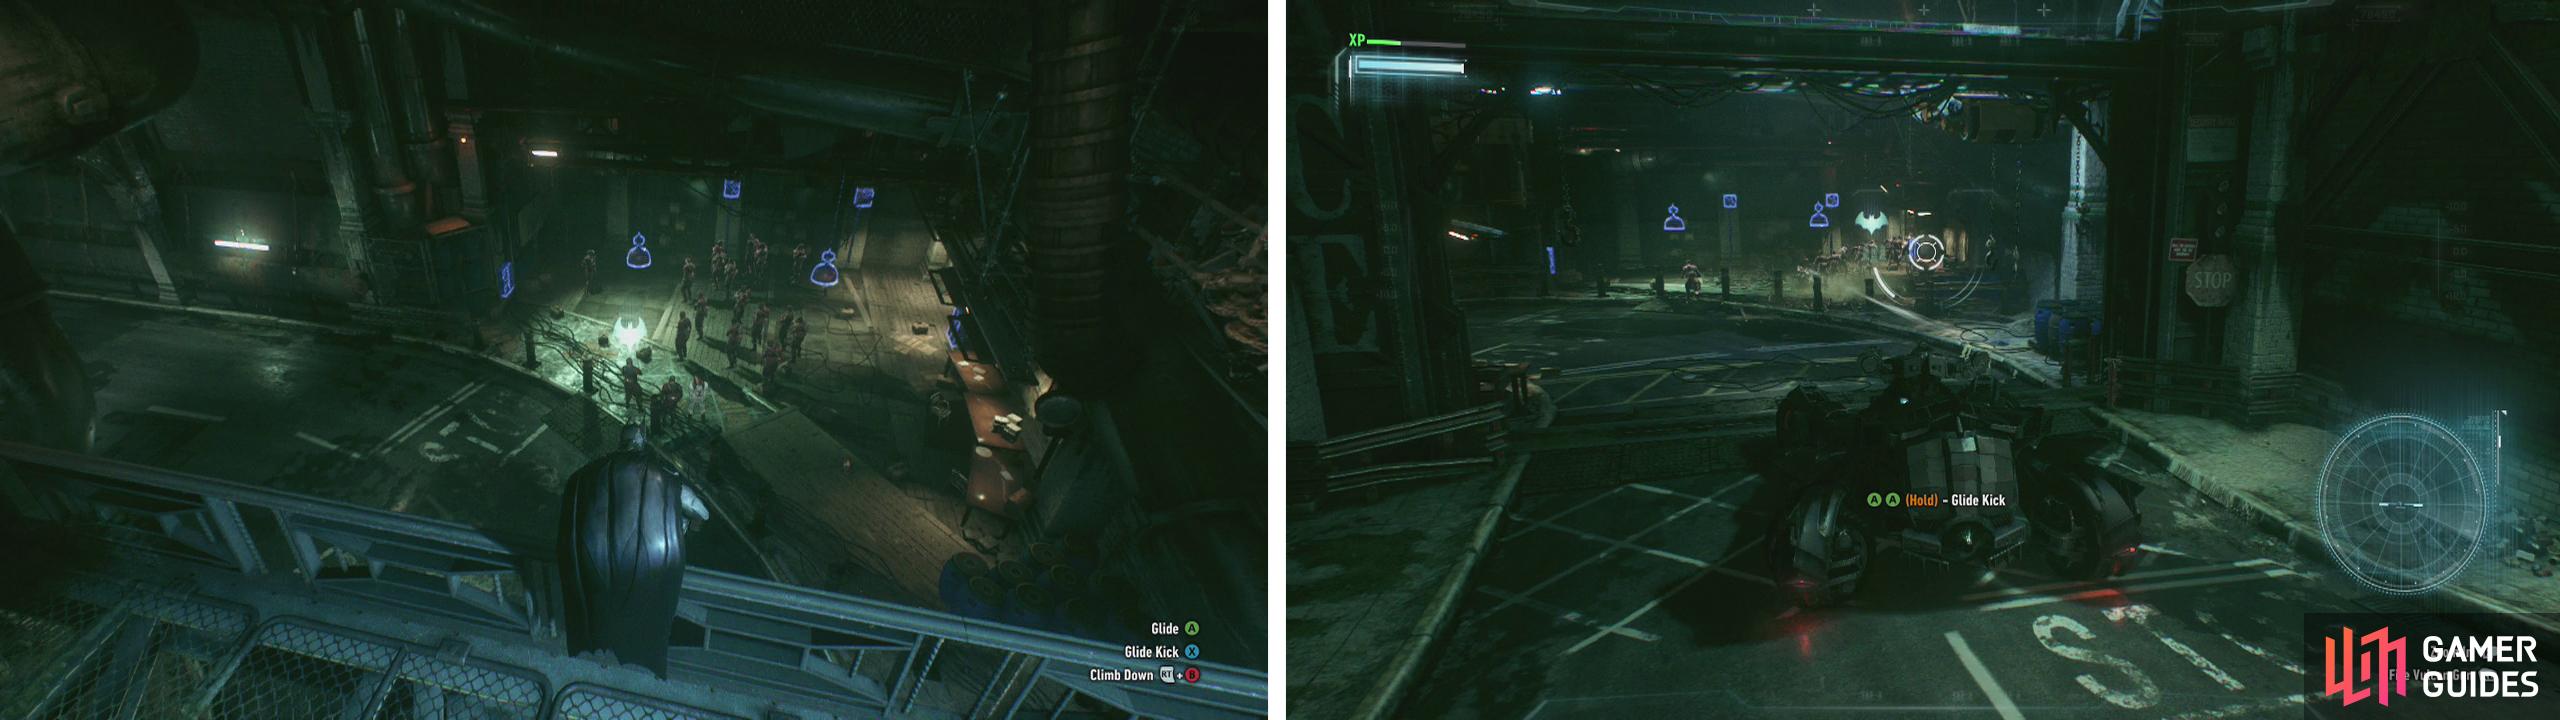 Grapple to the top of the gate (left). Drop down and unlock the door to bring the Batmobile through to fight the enemies (right).